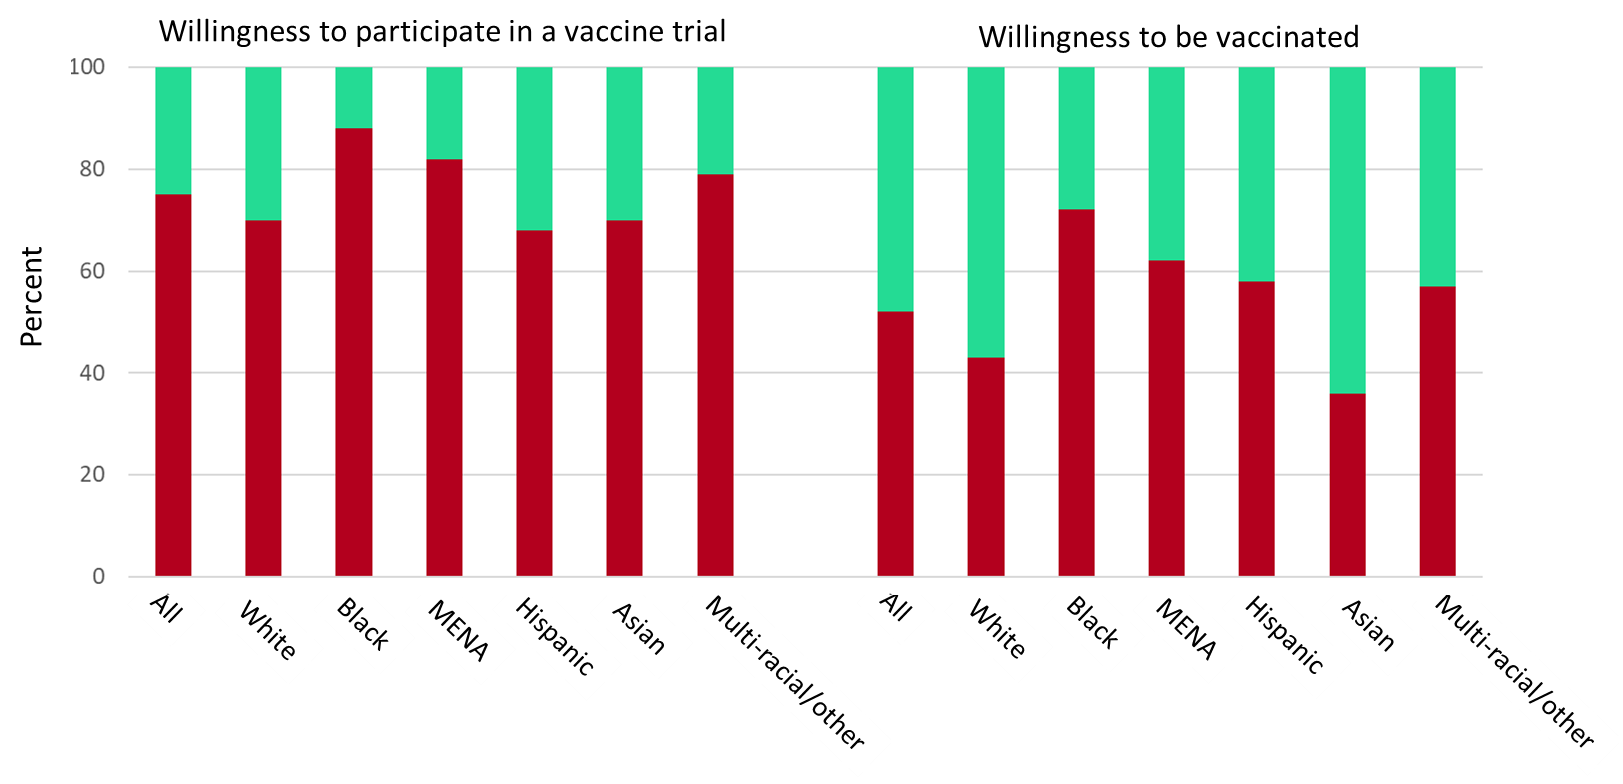 Chart showing percentage of respondents according to race who were willing to participate in a vaccine trial and vaccinated